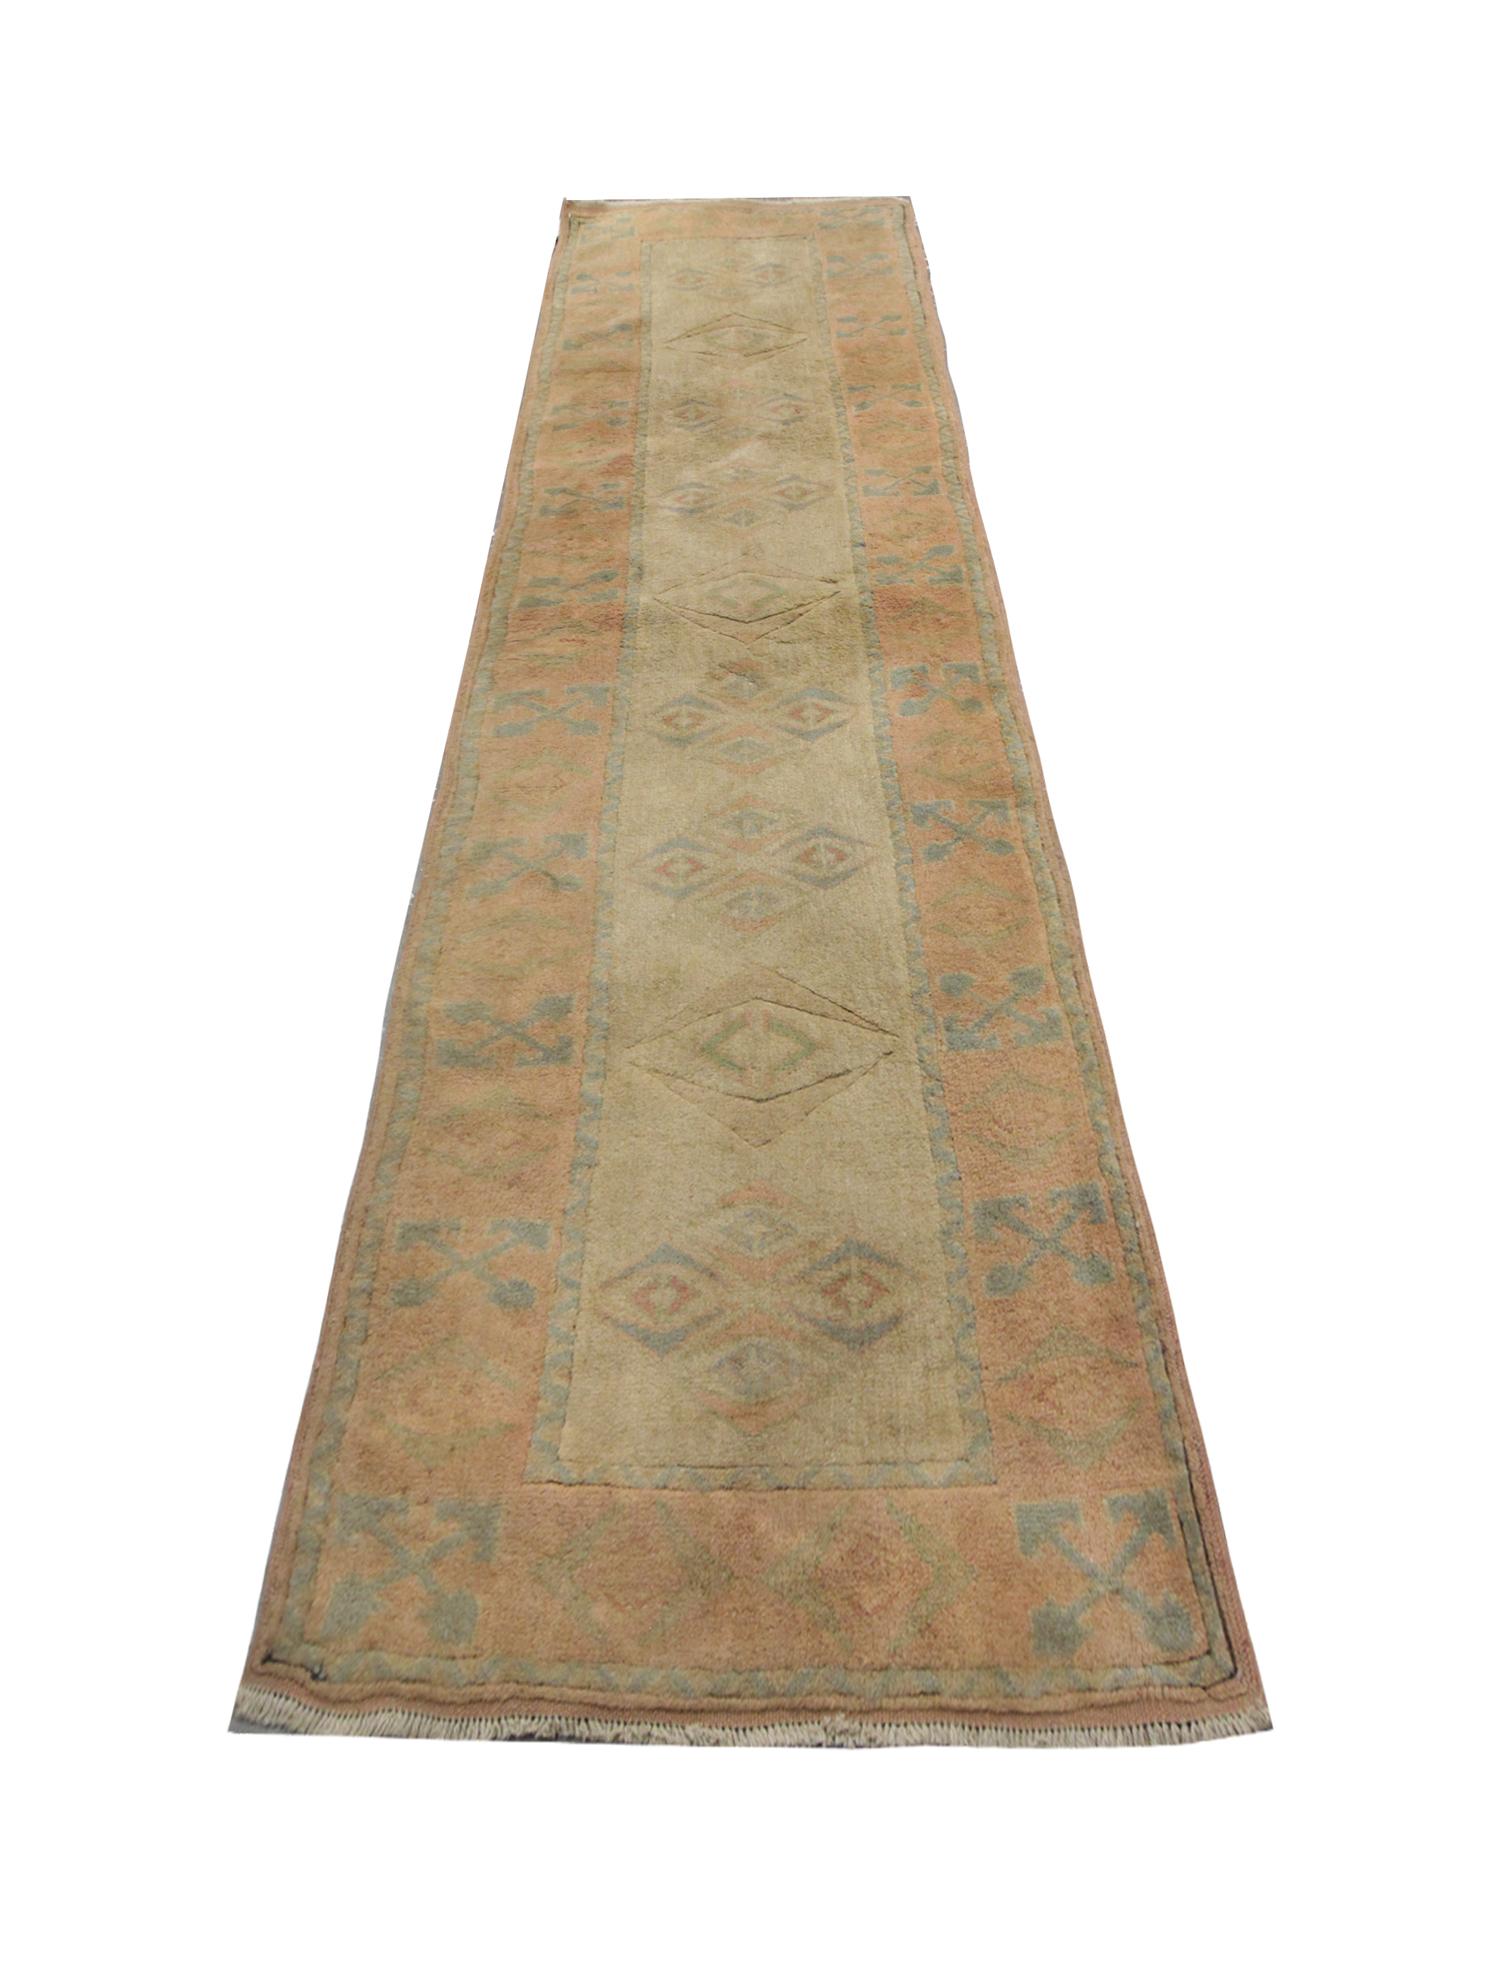 Subtle muted colors have been used in the construction of this high-quality, long antique runner. Cream and peach tones have been used as background colors for this Oriental rug, decorated with simple repeat geometric patterns. This traditional